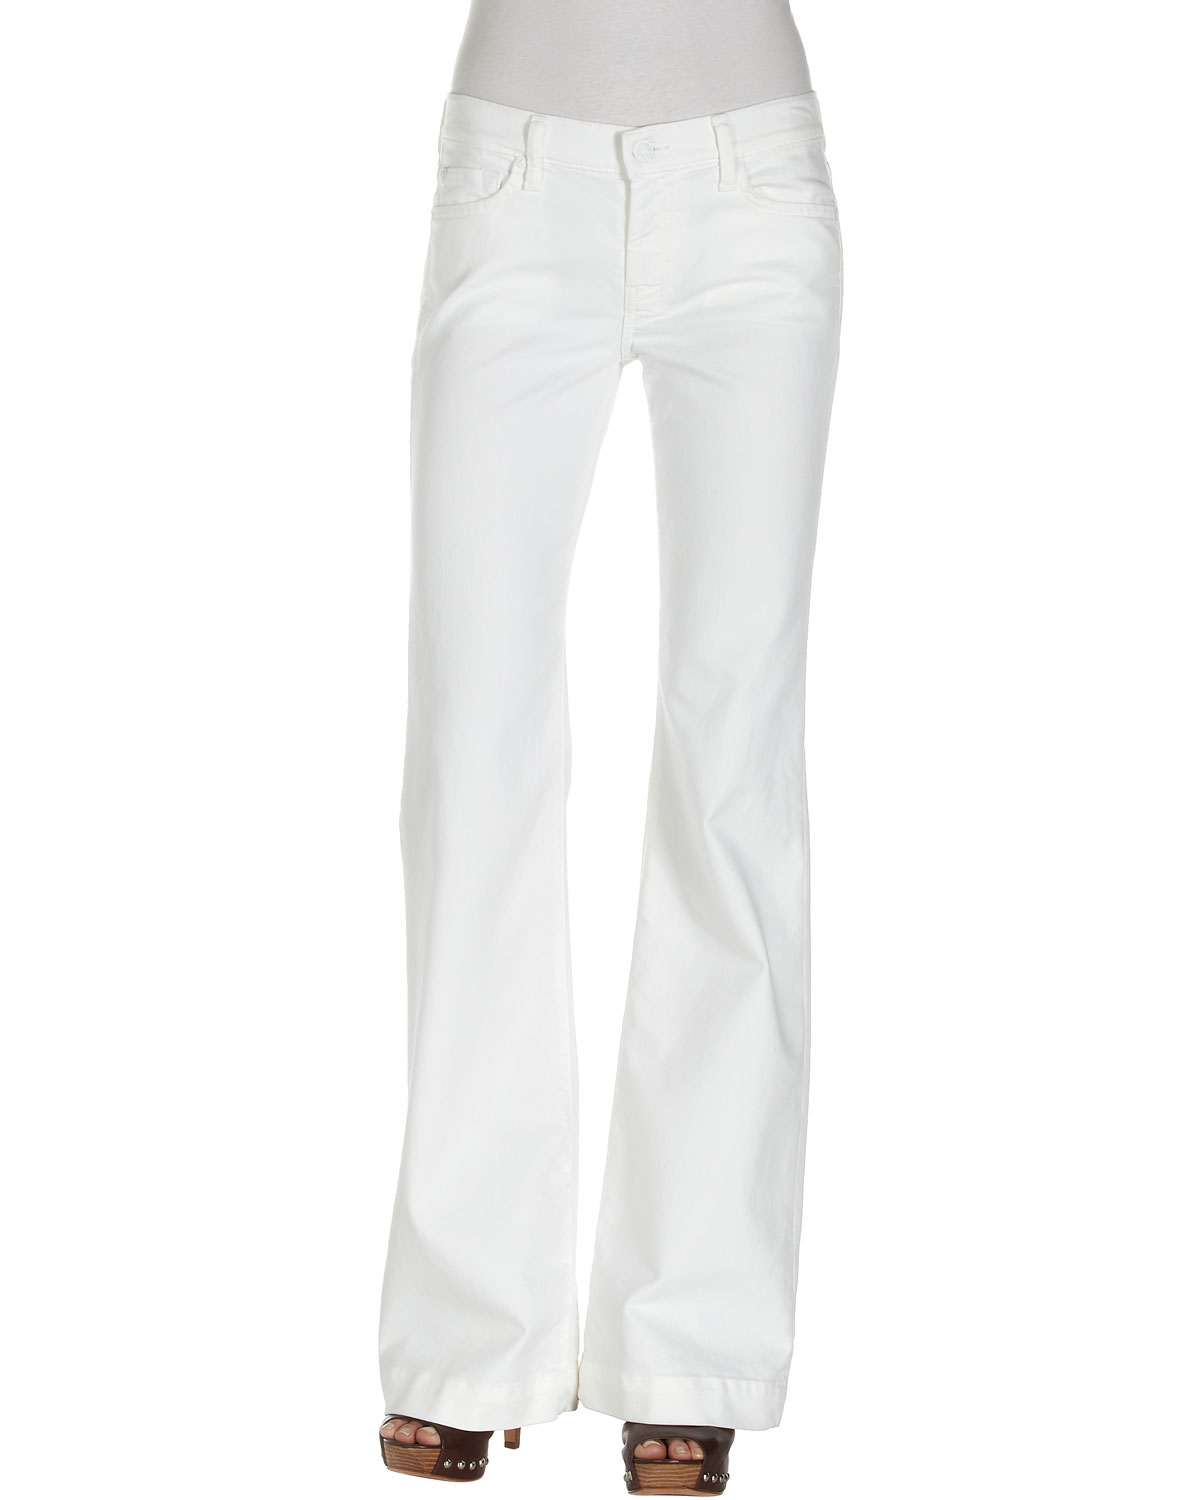 7 For All Mankind Dojo Crystal Pocket Jeans in White | Lyst